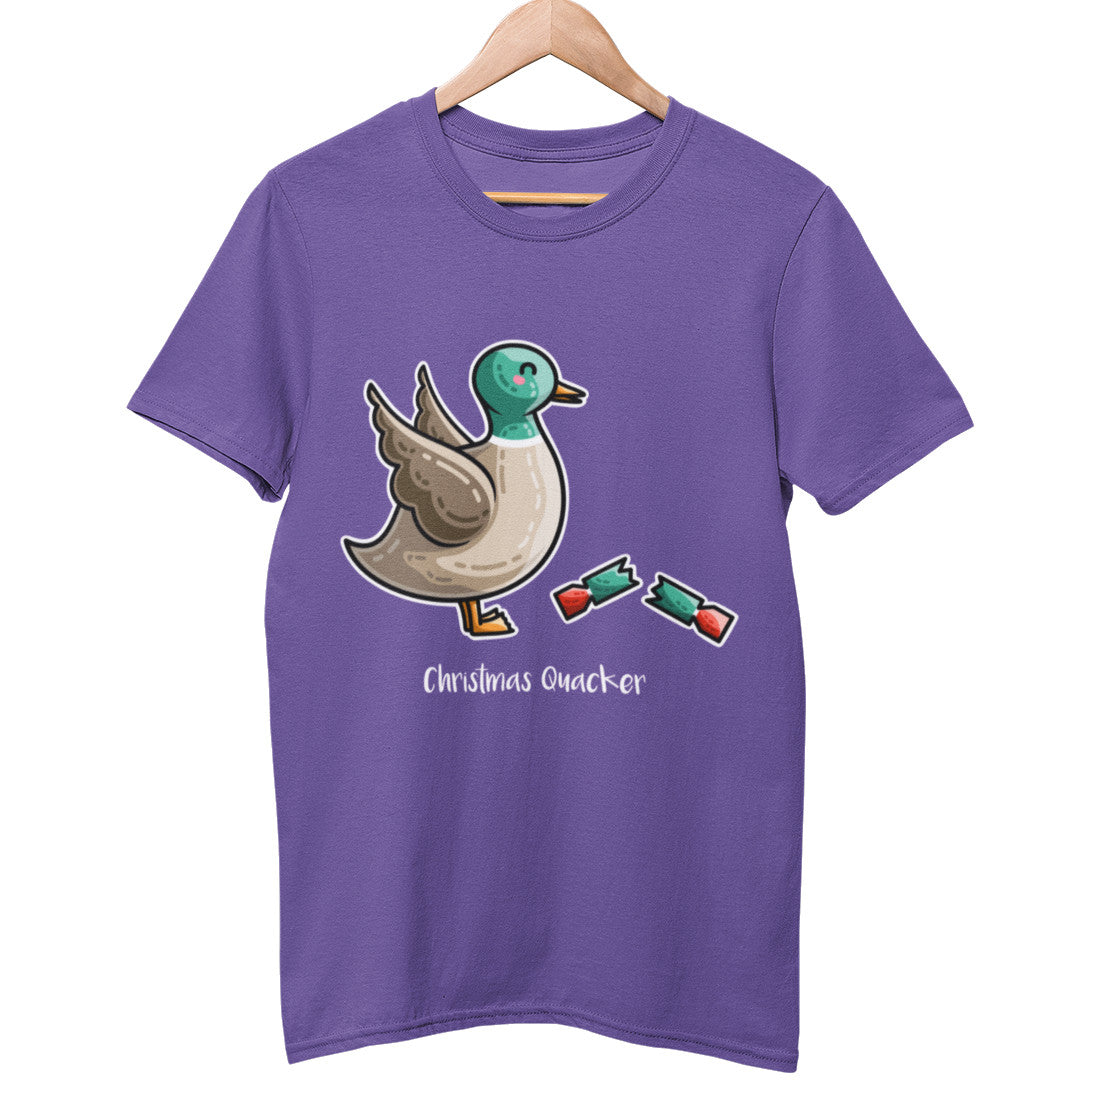 A purple unisex crewneck t-shirt on a hanger with a design on its chest of a kawaii cute mallard duck with its wings out looking slightly alarmed and a Christmas cracker in half at its feet with the words Christmas Quacker in white beneath